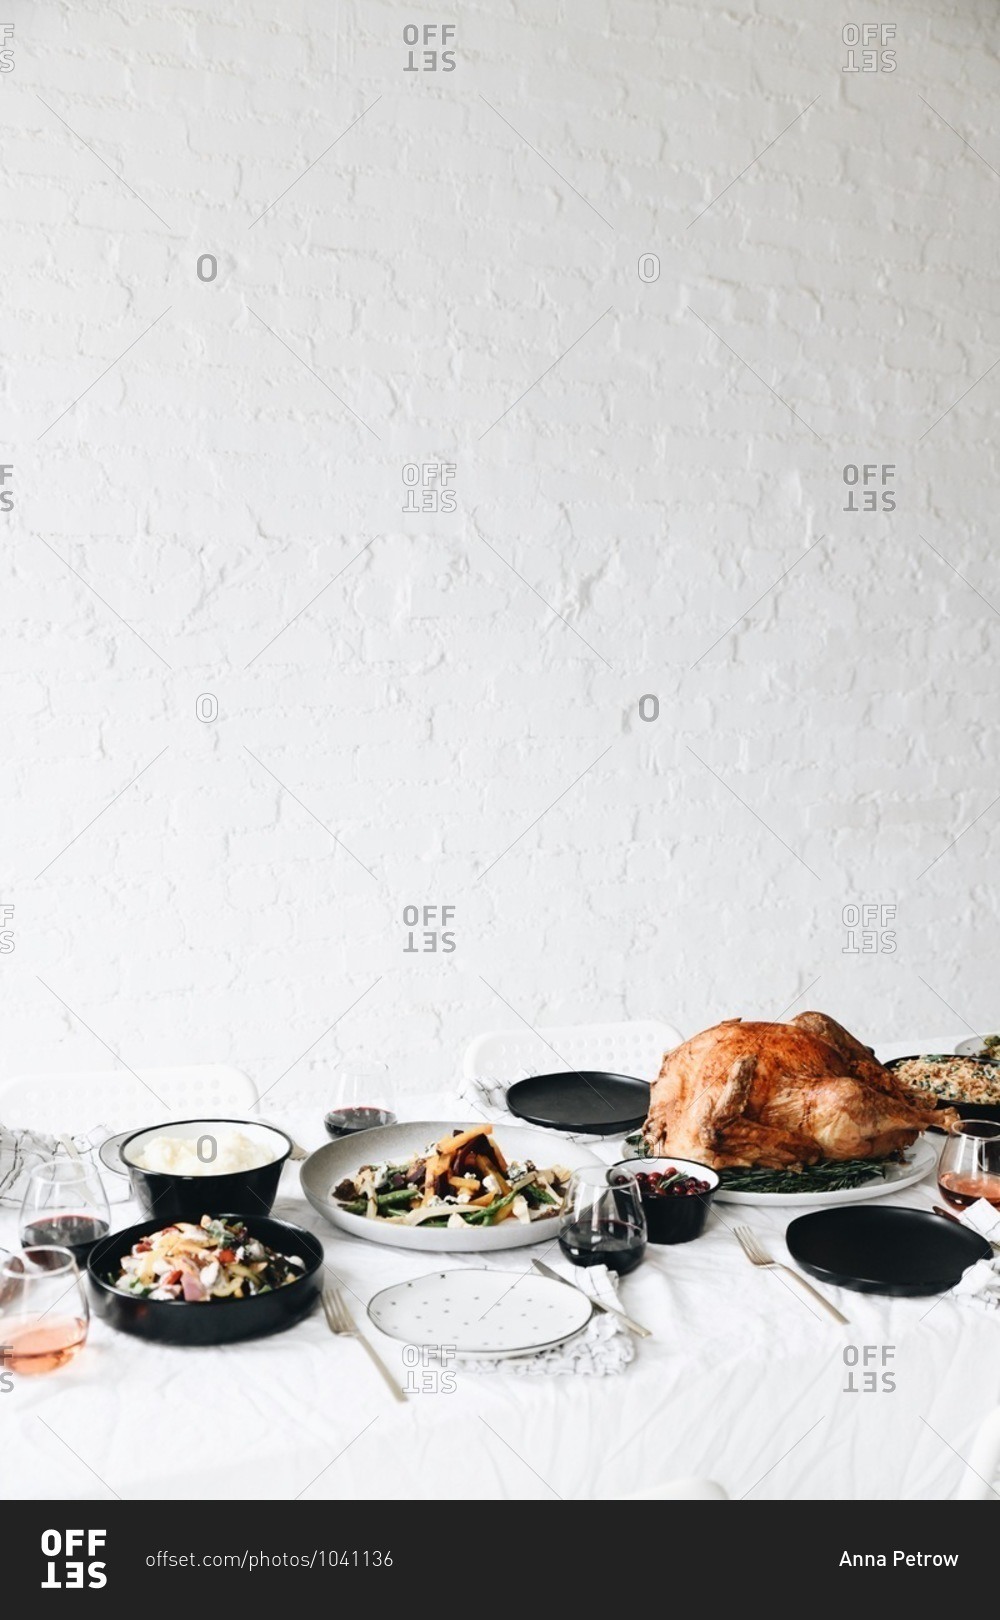 Traditional Thanksgiving dinner food served on a table in front of white texture wall